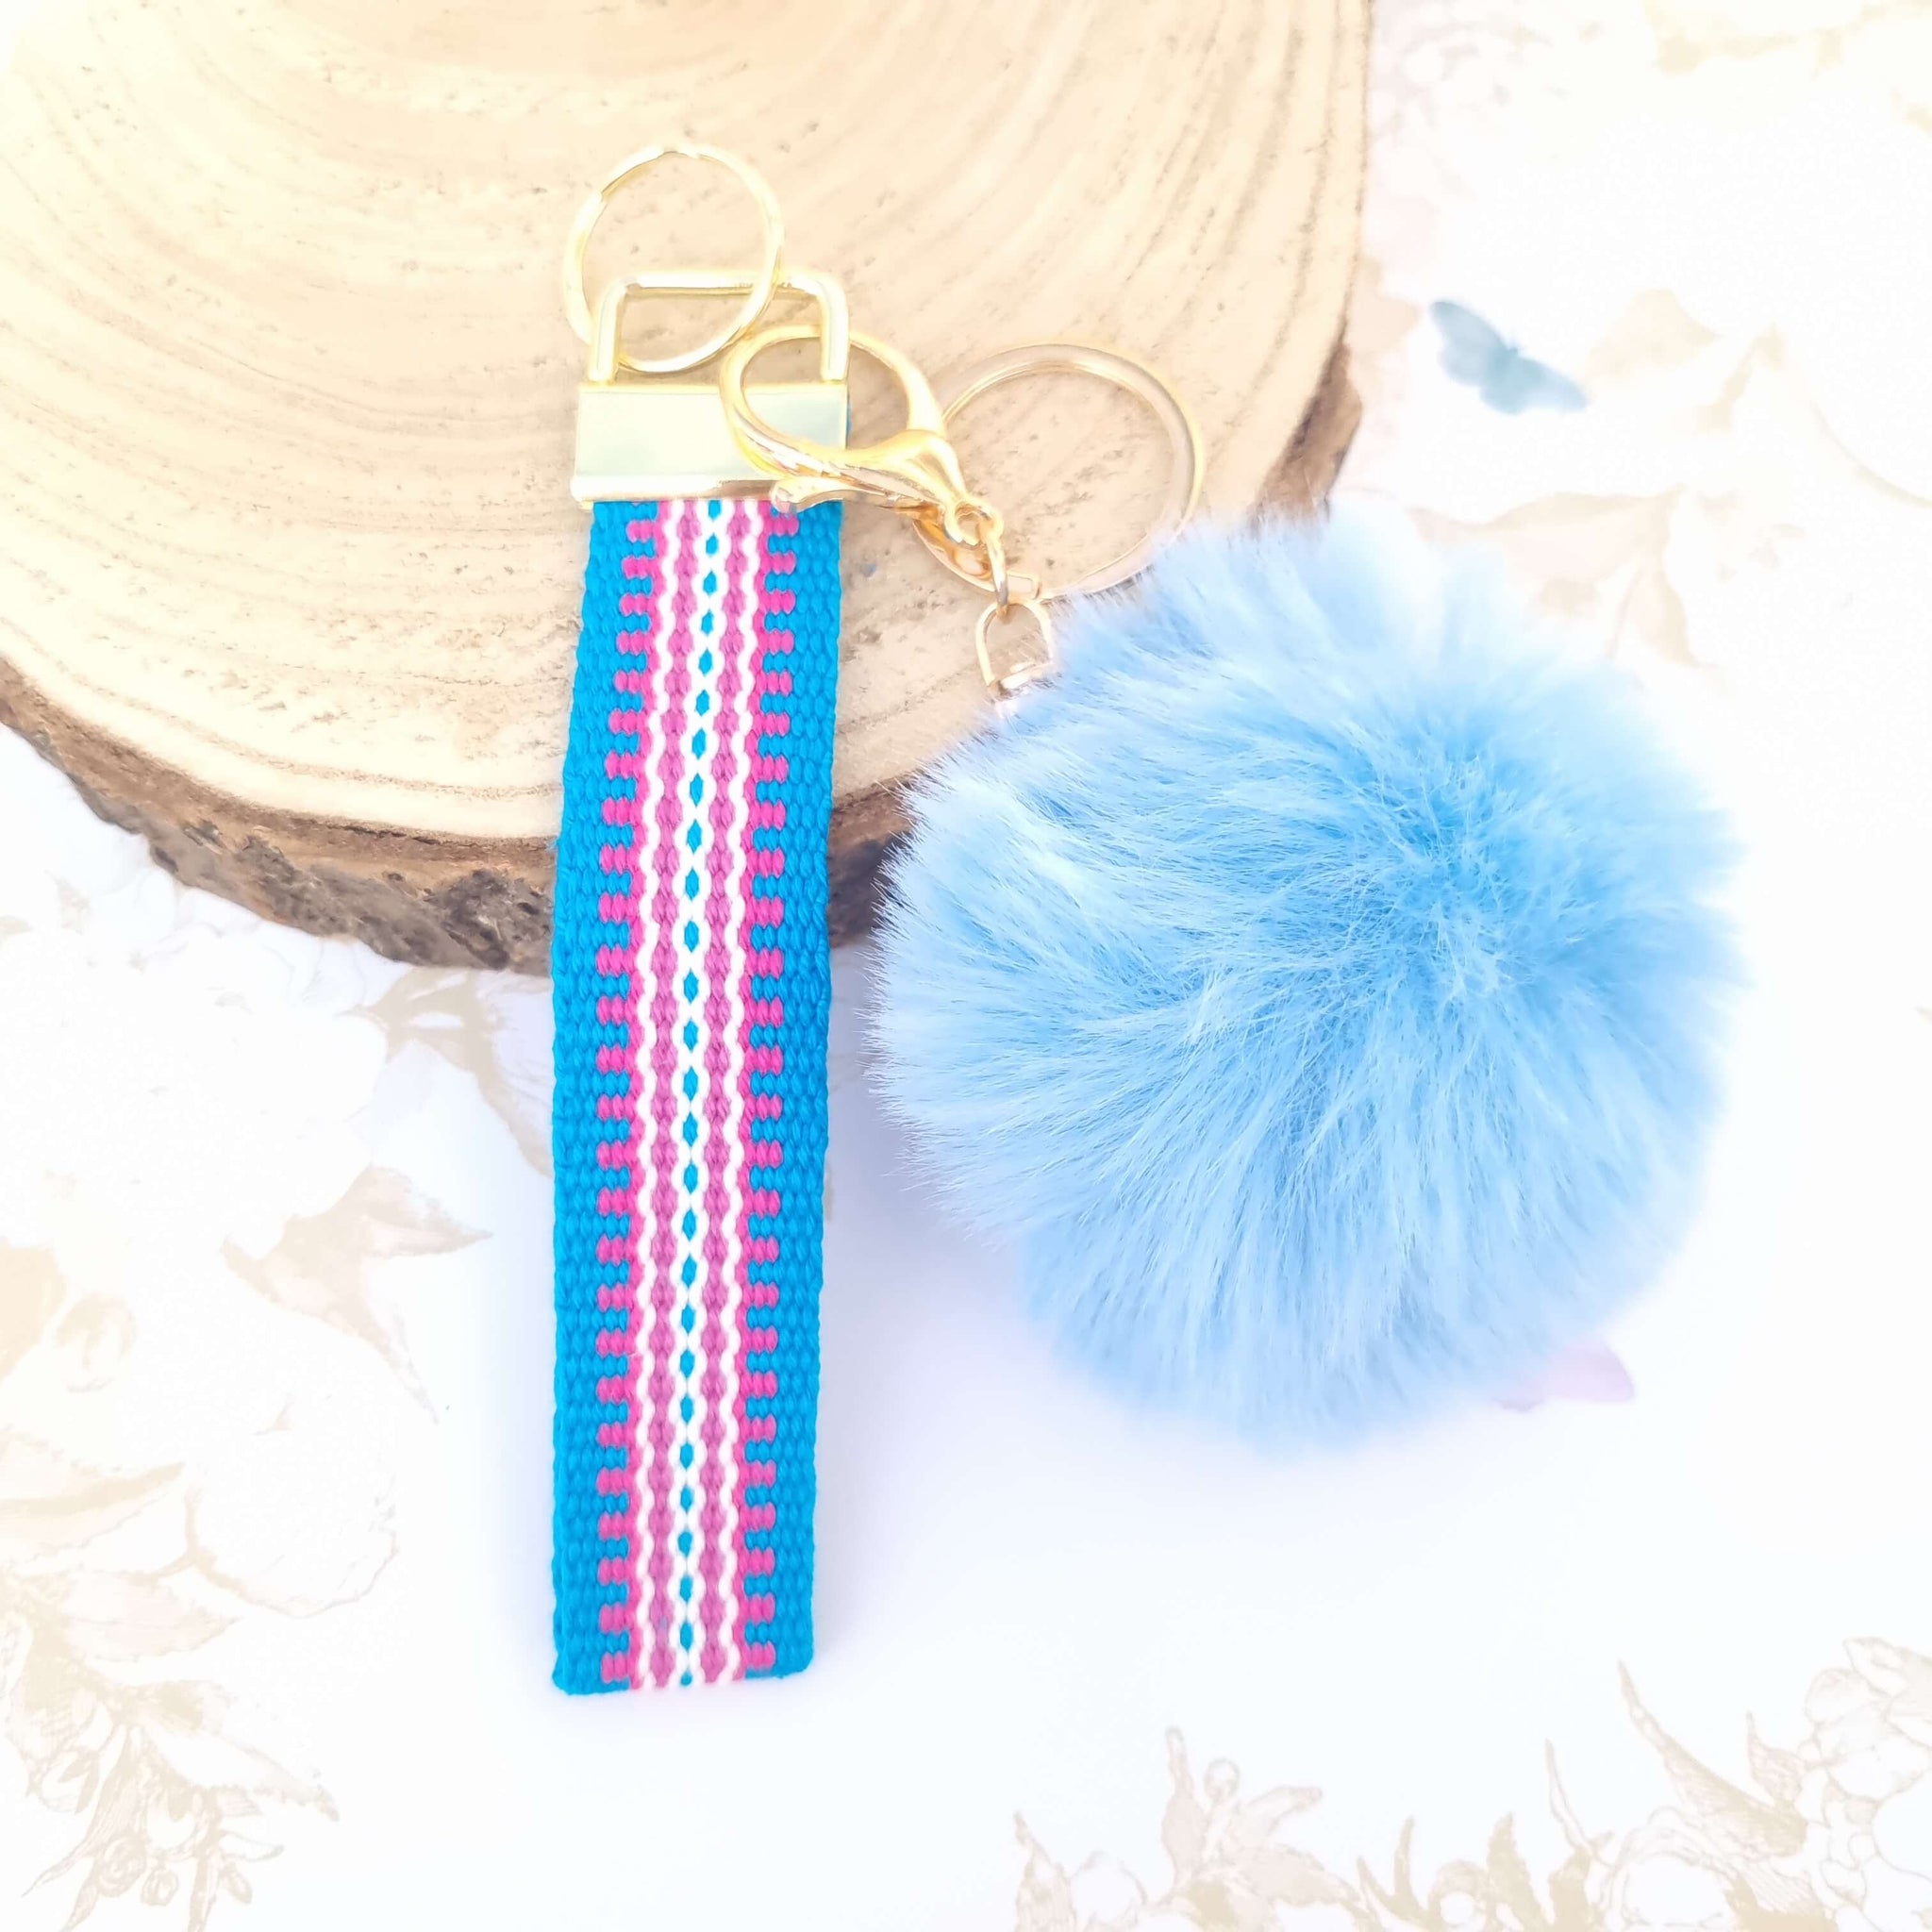 wrist lanyard in blue and pink with pompom